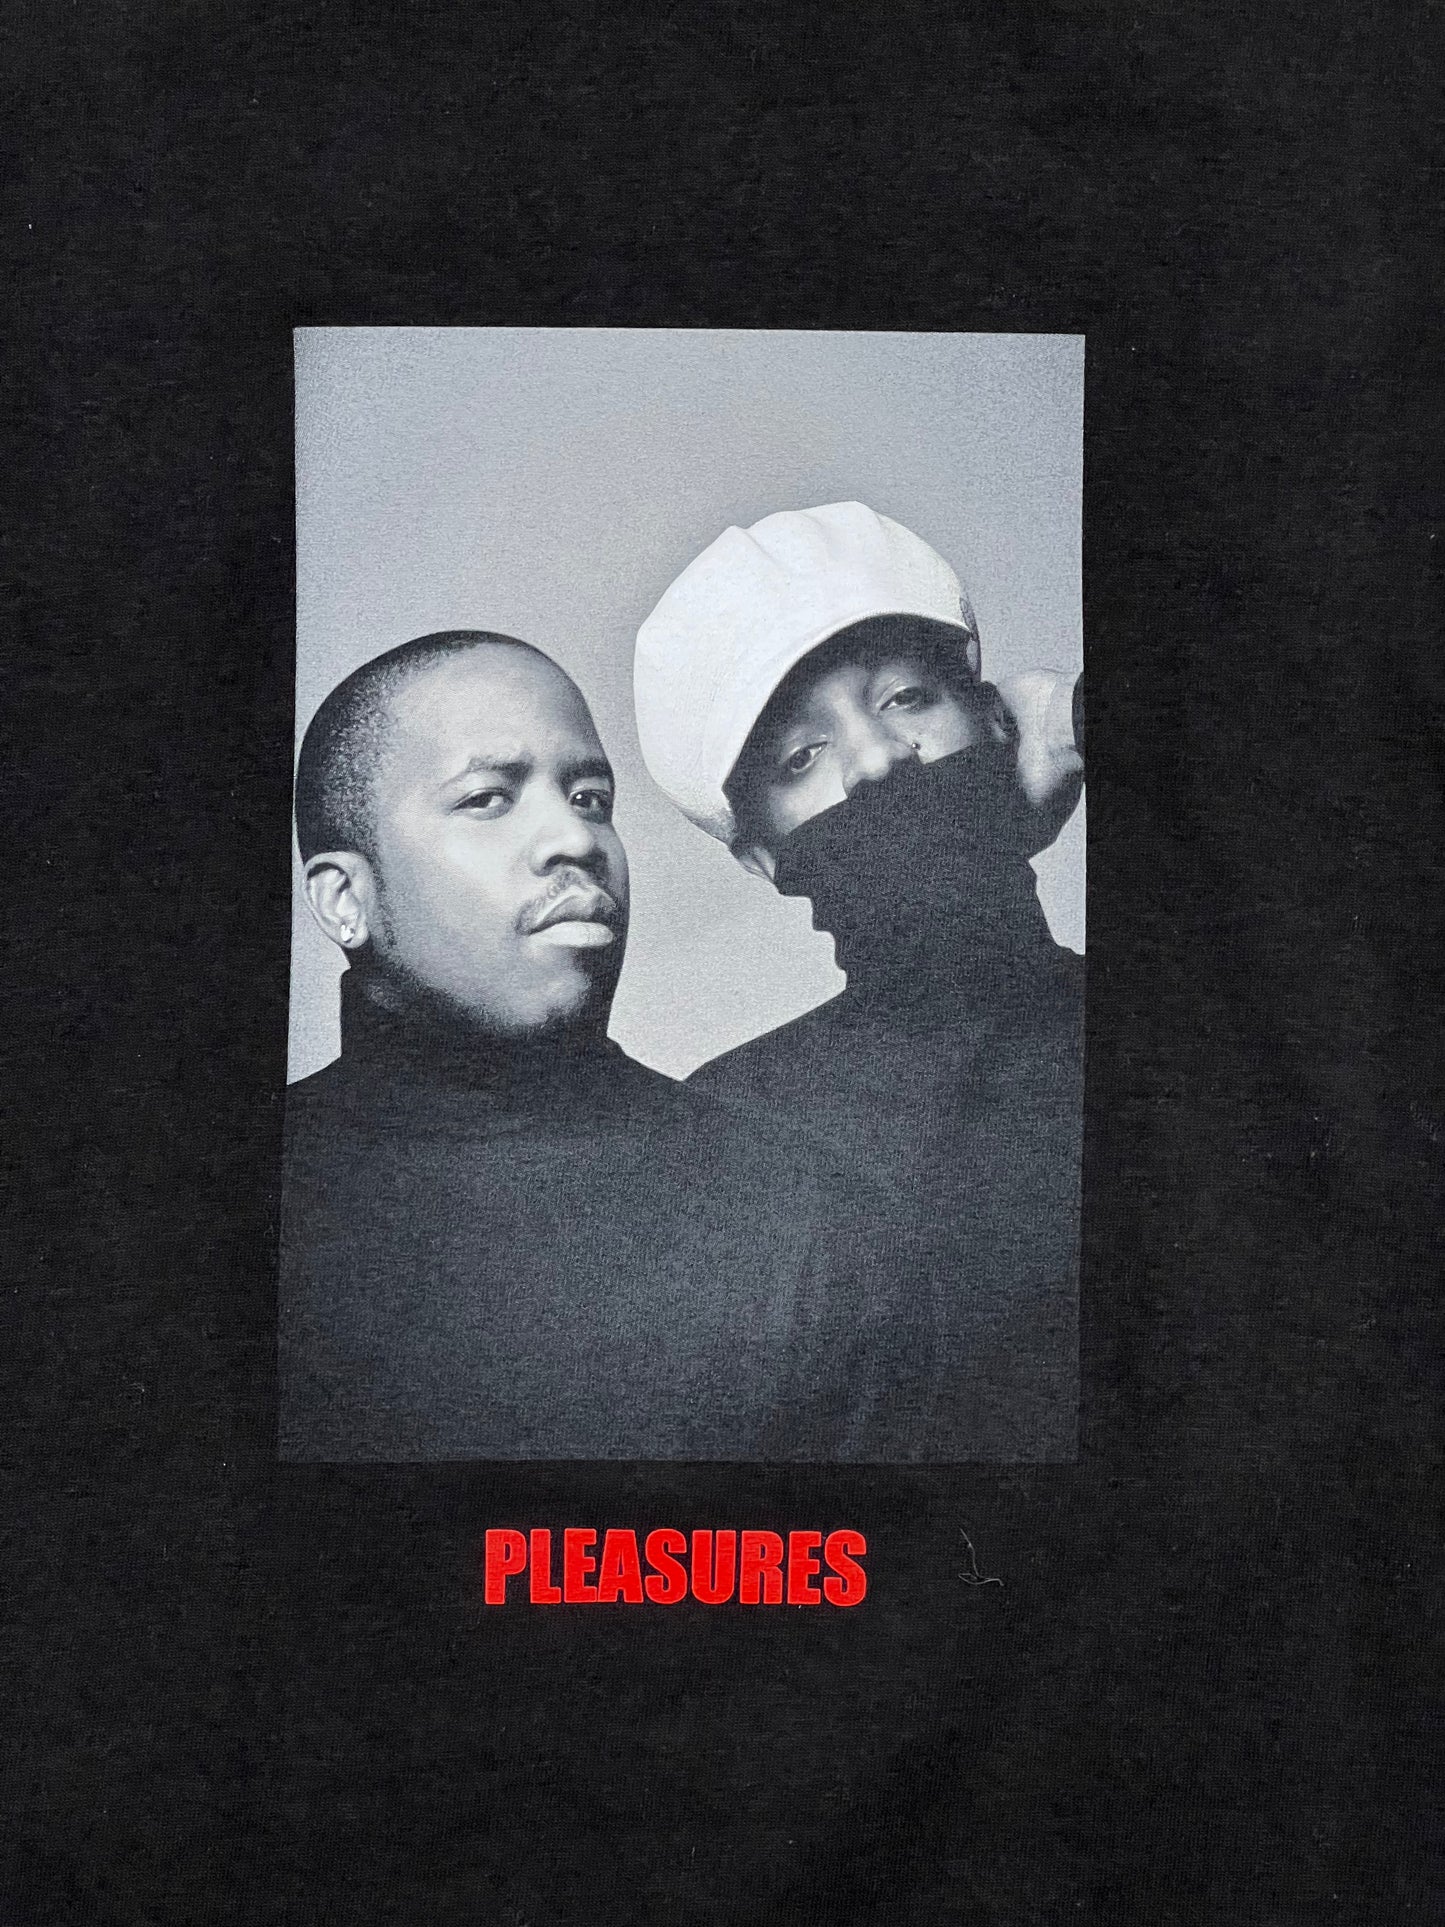 A PLEASURES black t-shirt adorned with a picture of two men discussing their vocabulary pleasures.